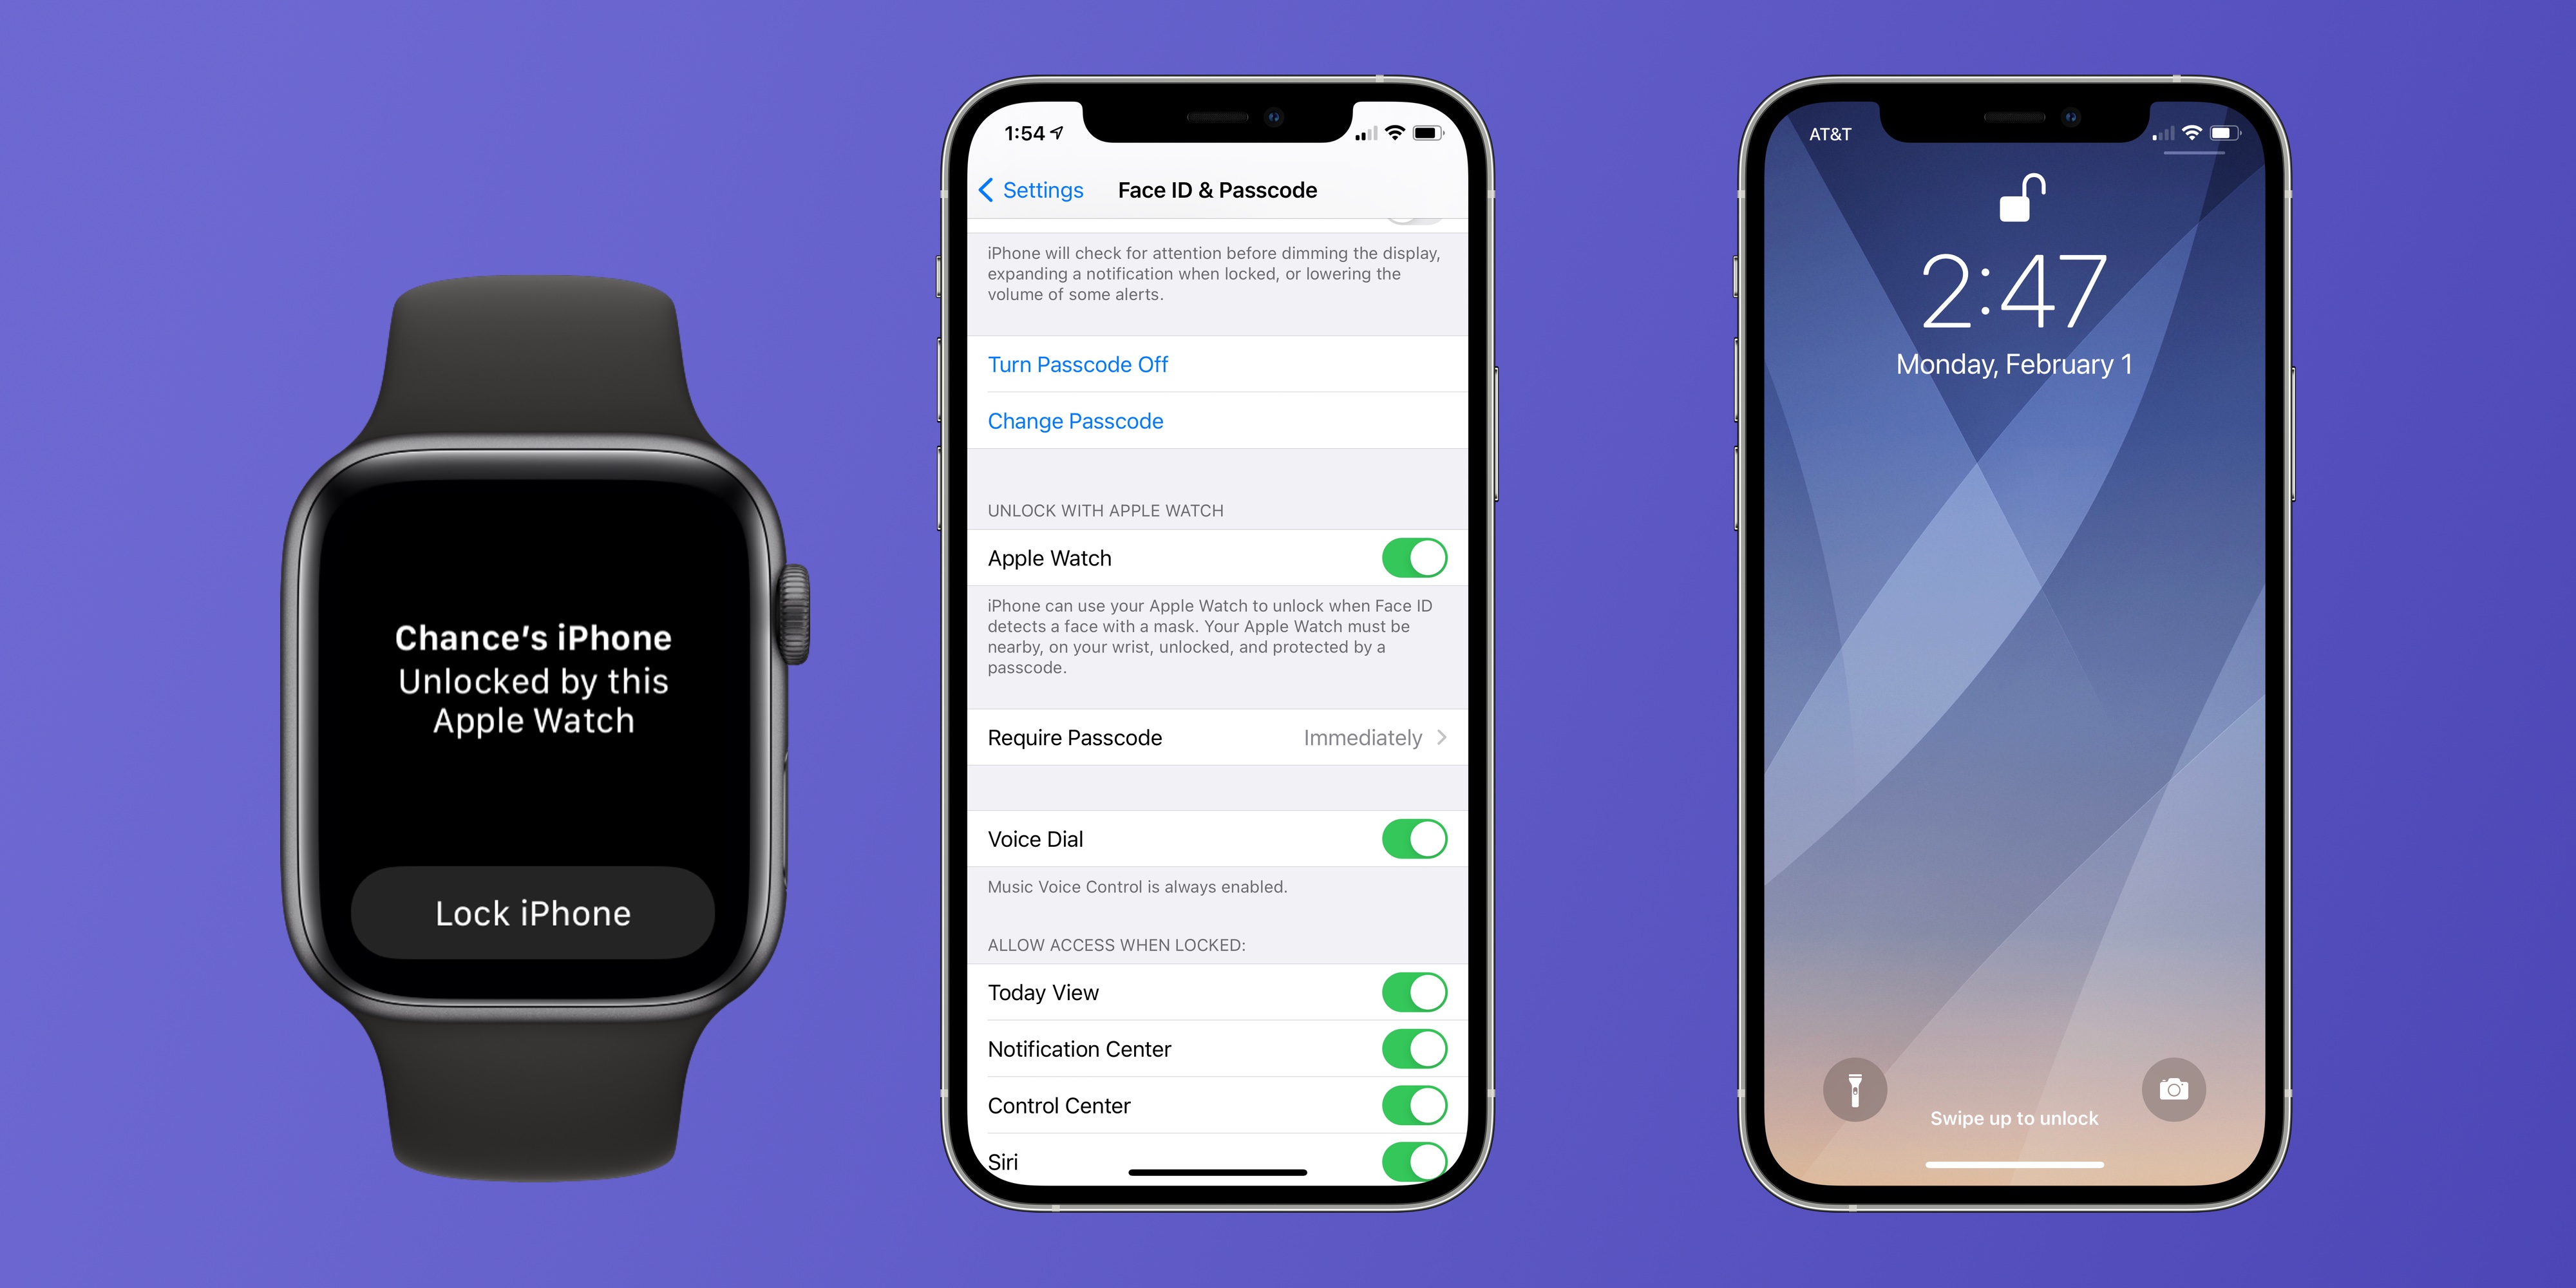 How to use the new 'Unlock with Apple Watch' iPhone feature - 9to5Mac